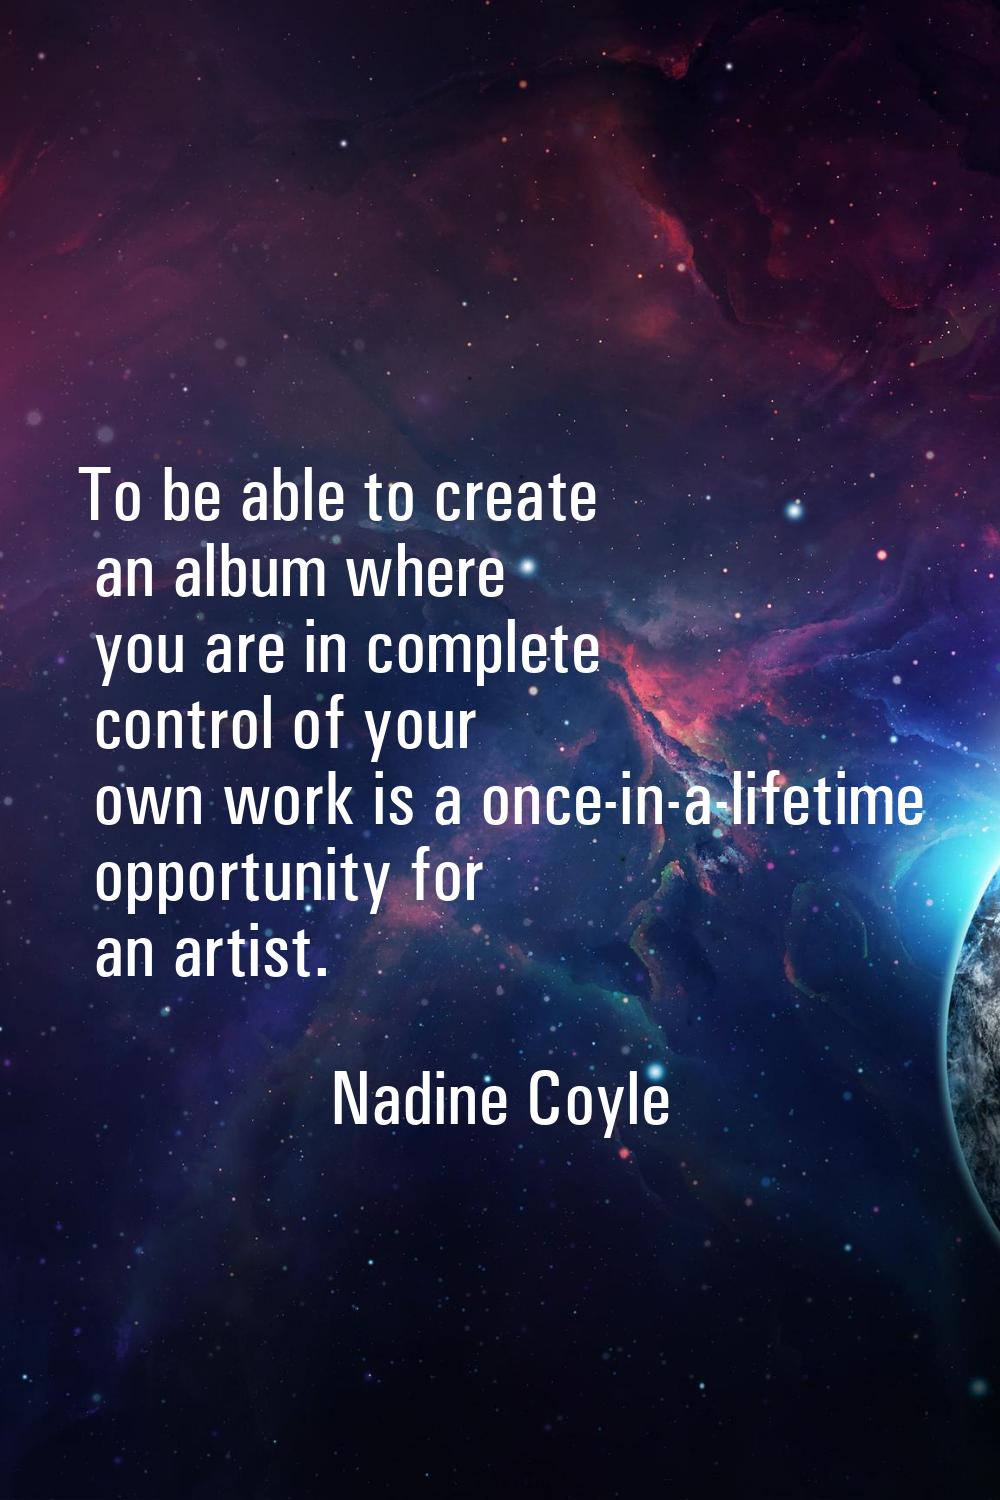 To be able to create an album where you are in complete control of your own work is a once-in-a-lif